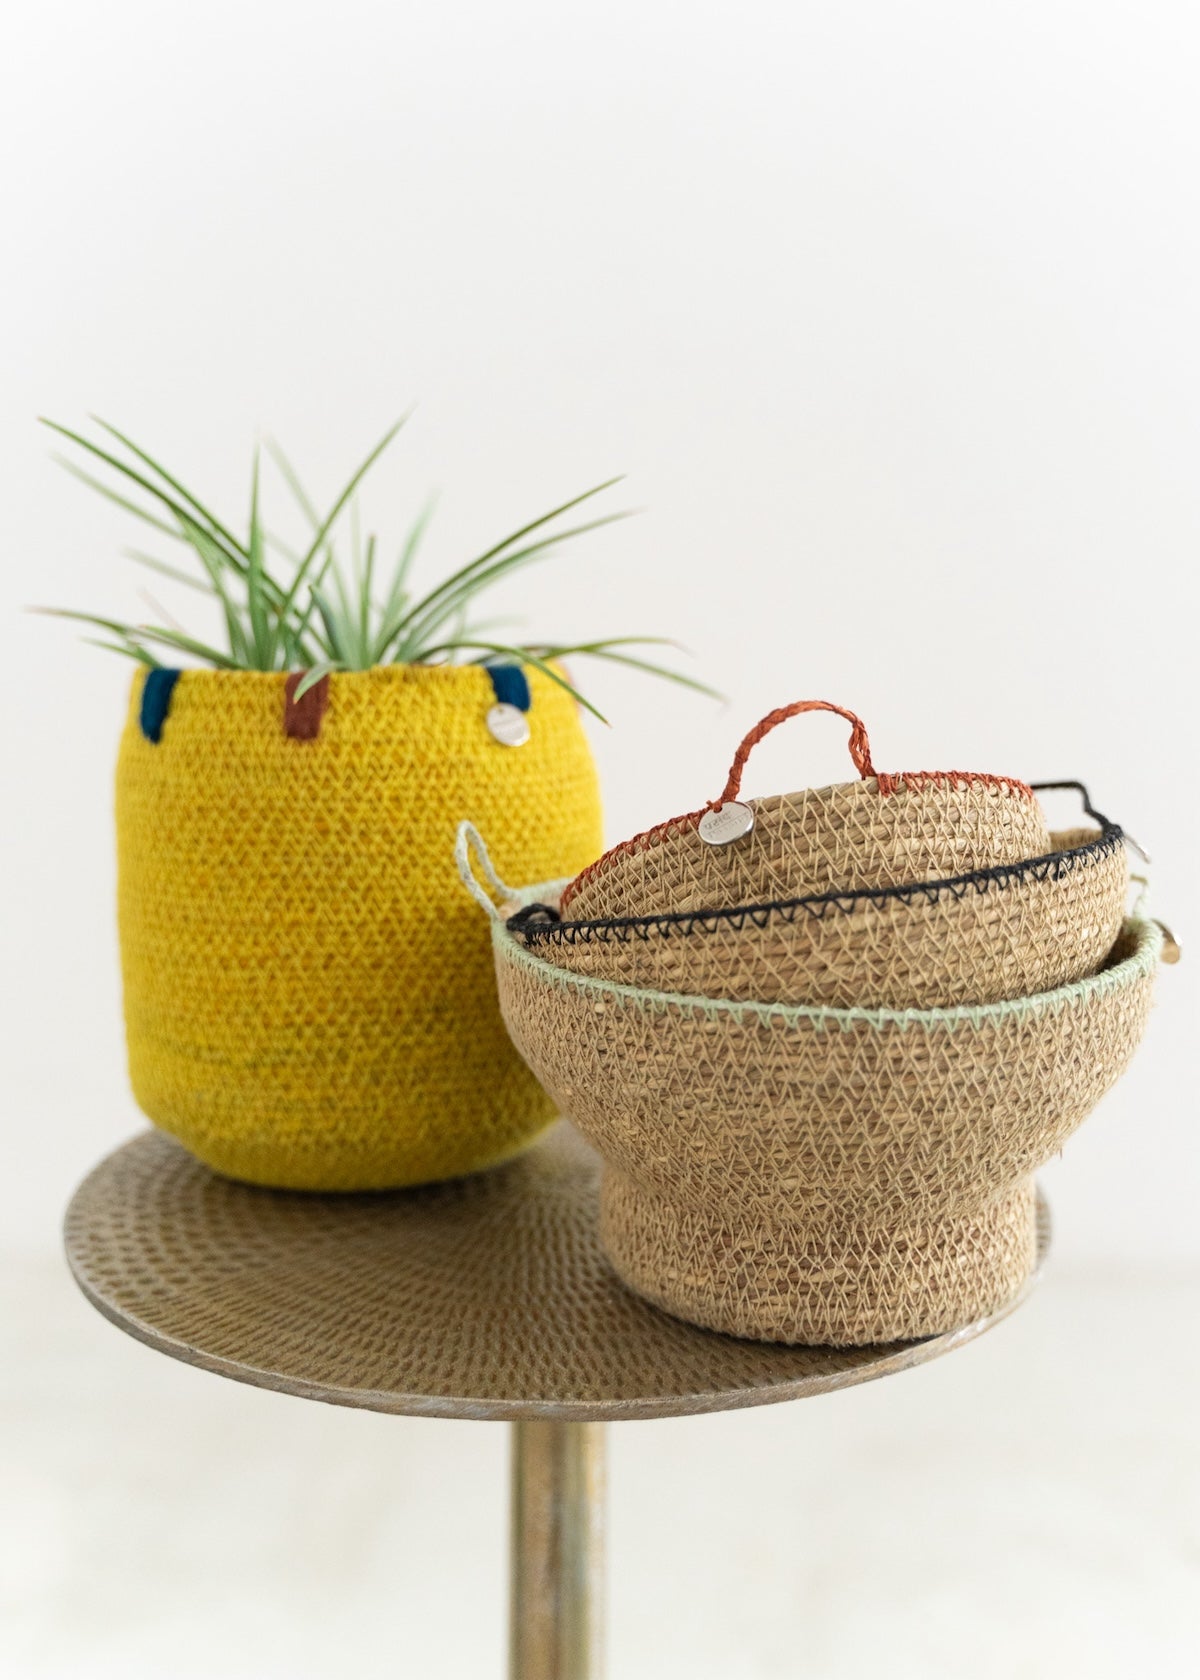 3 Baskets with Handle